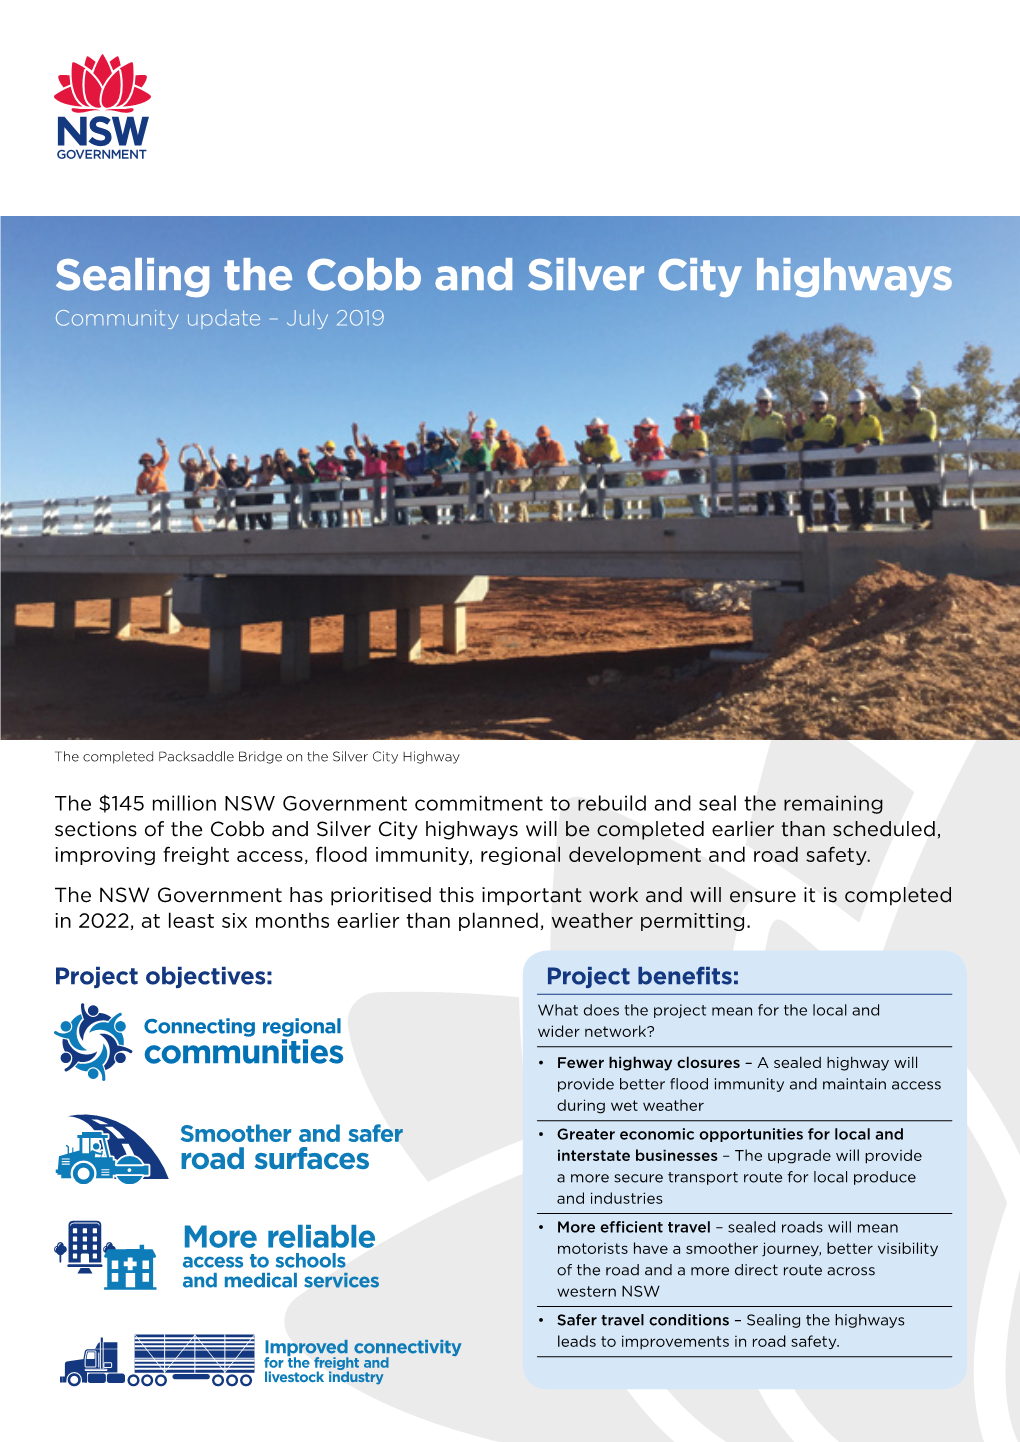 Sealing the Cobb and Silver City Highways Community Update July